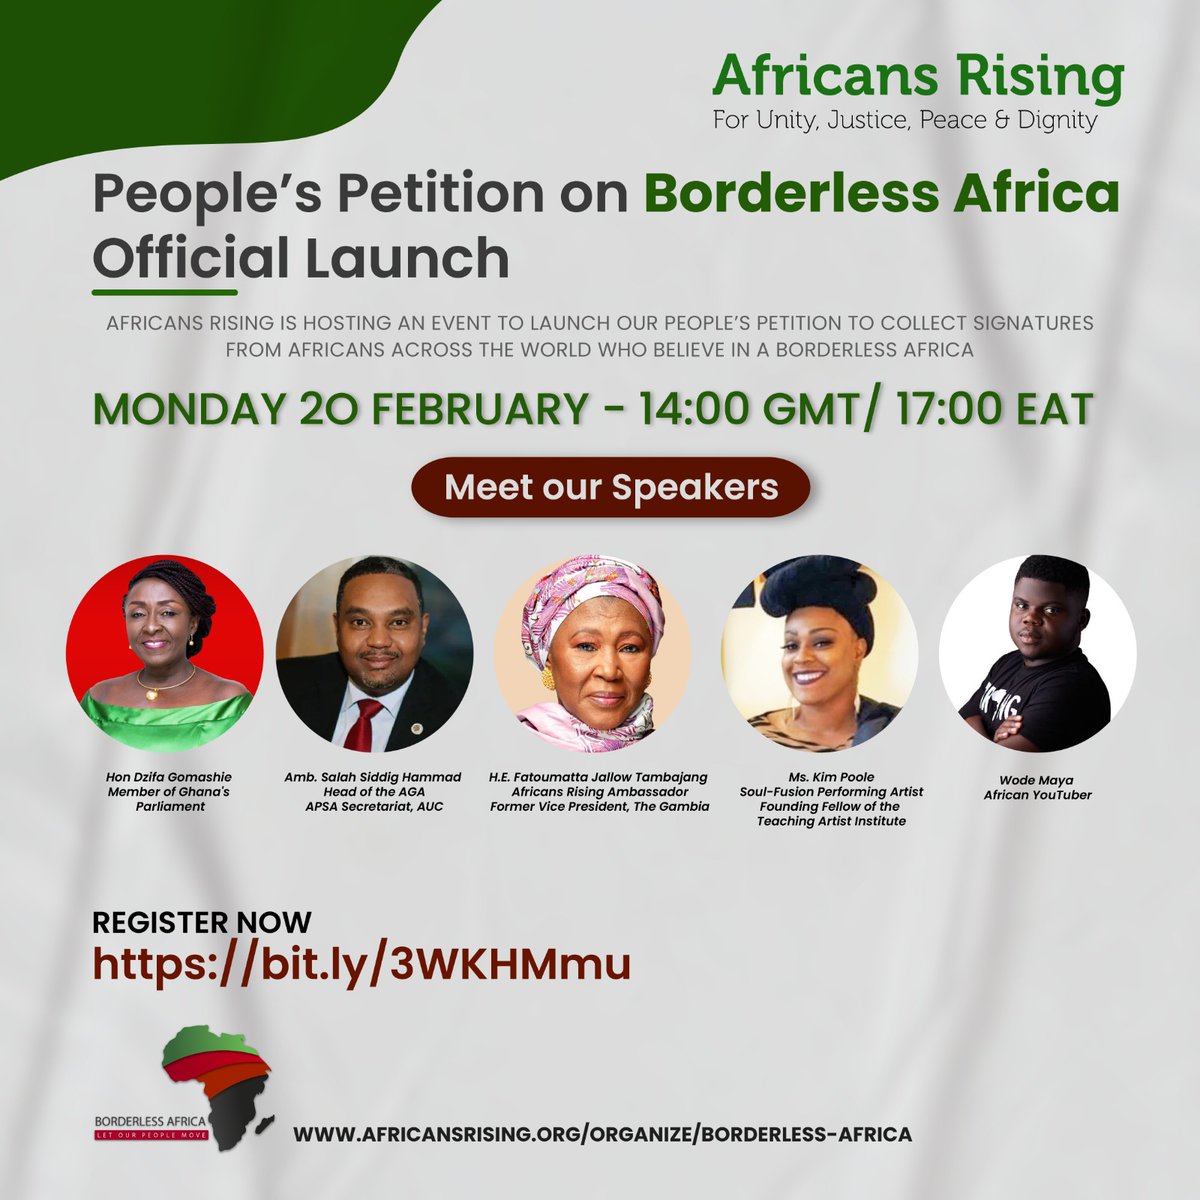 Join the ongoing conversation on how we can enhance better initiatives for Africa and promote sucess especially in media.
Click here to join: bit.ly/3RhcbYD.
#AfricansRising 
#BorderlessAfrica